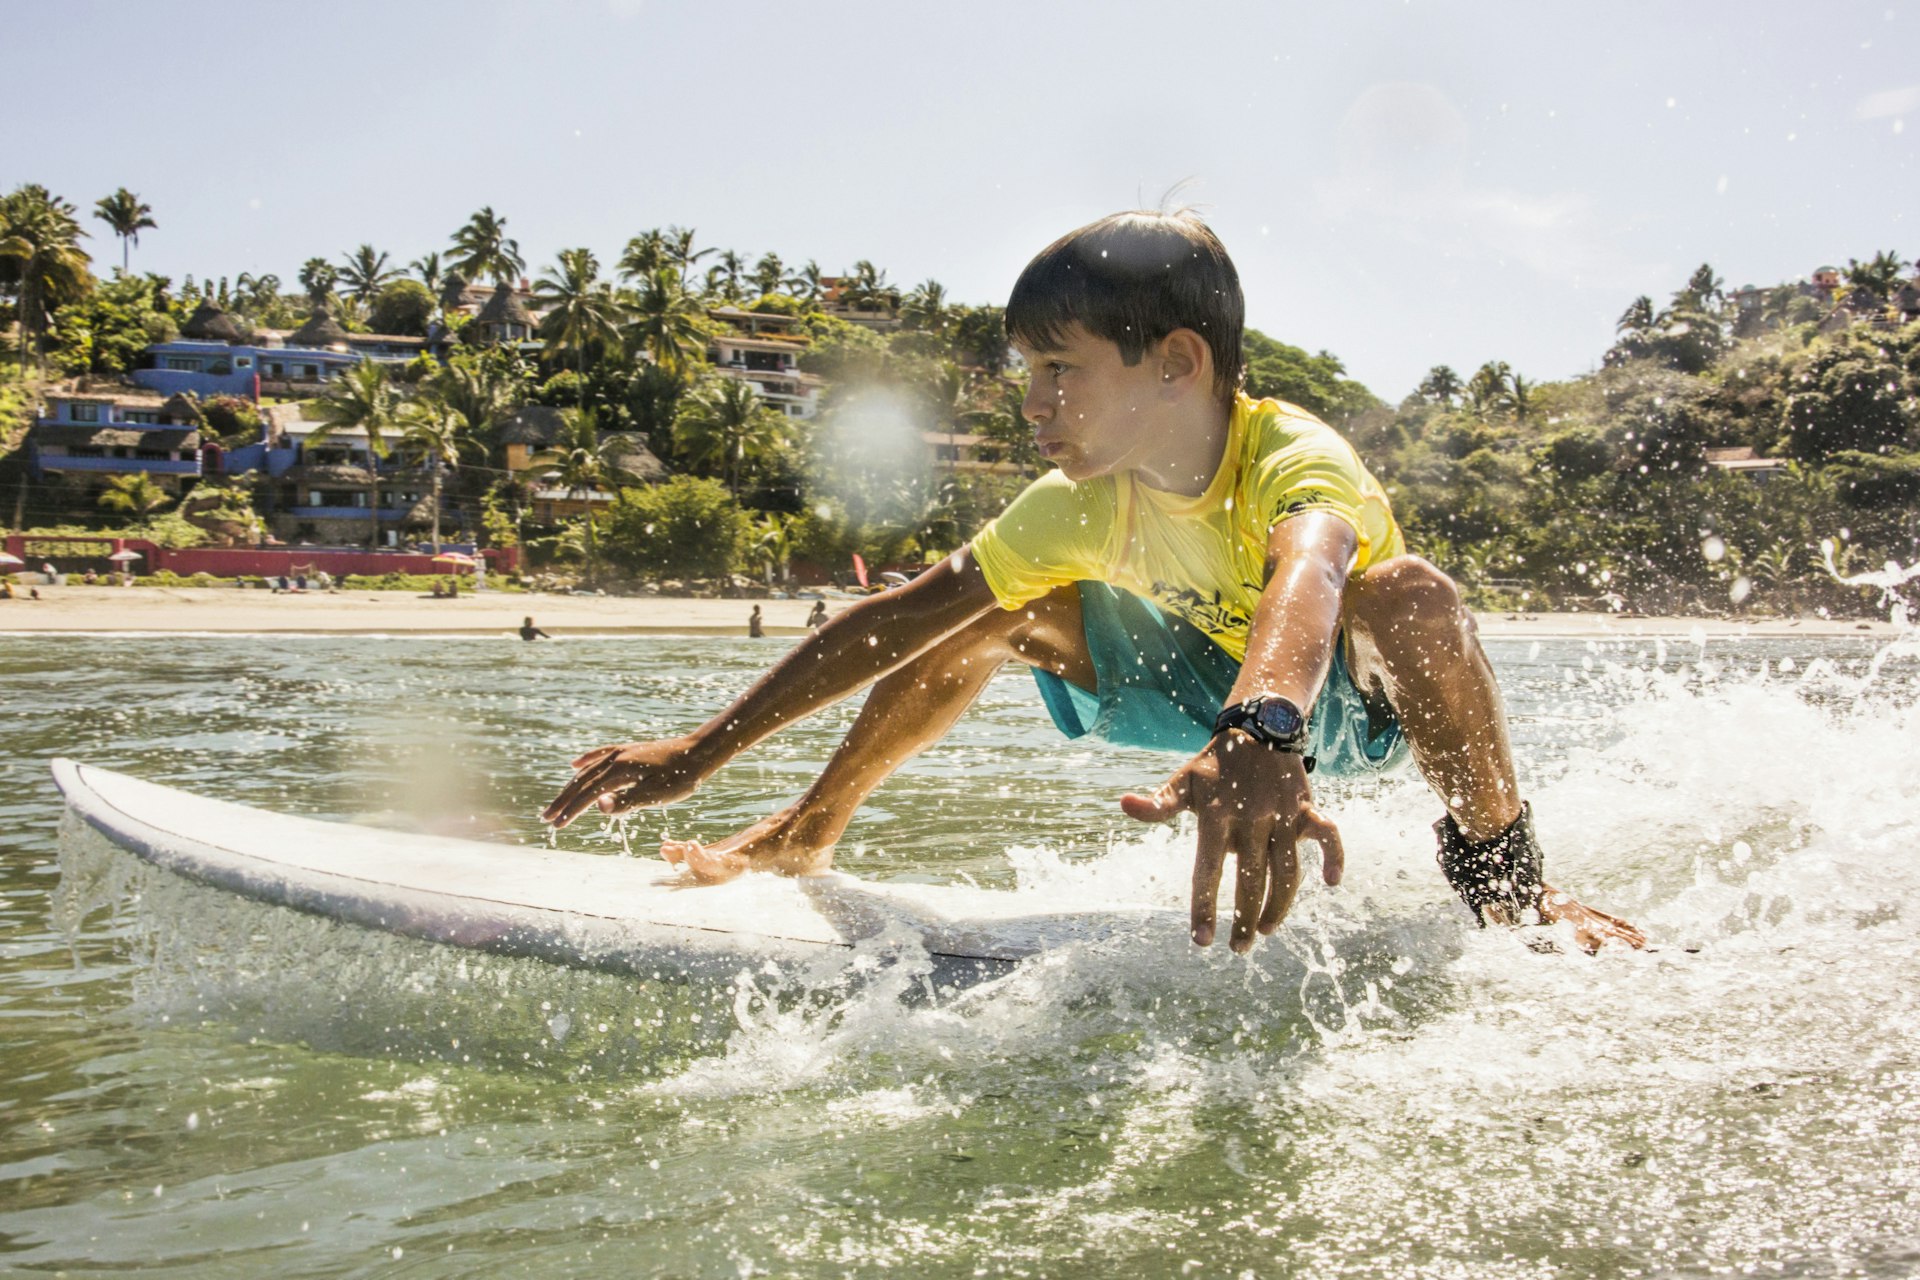 Young boy surfs in the Sayulita bay © Sollina Images / Getty Images